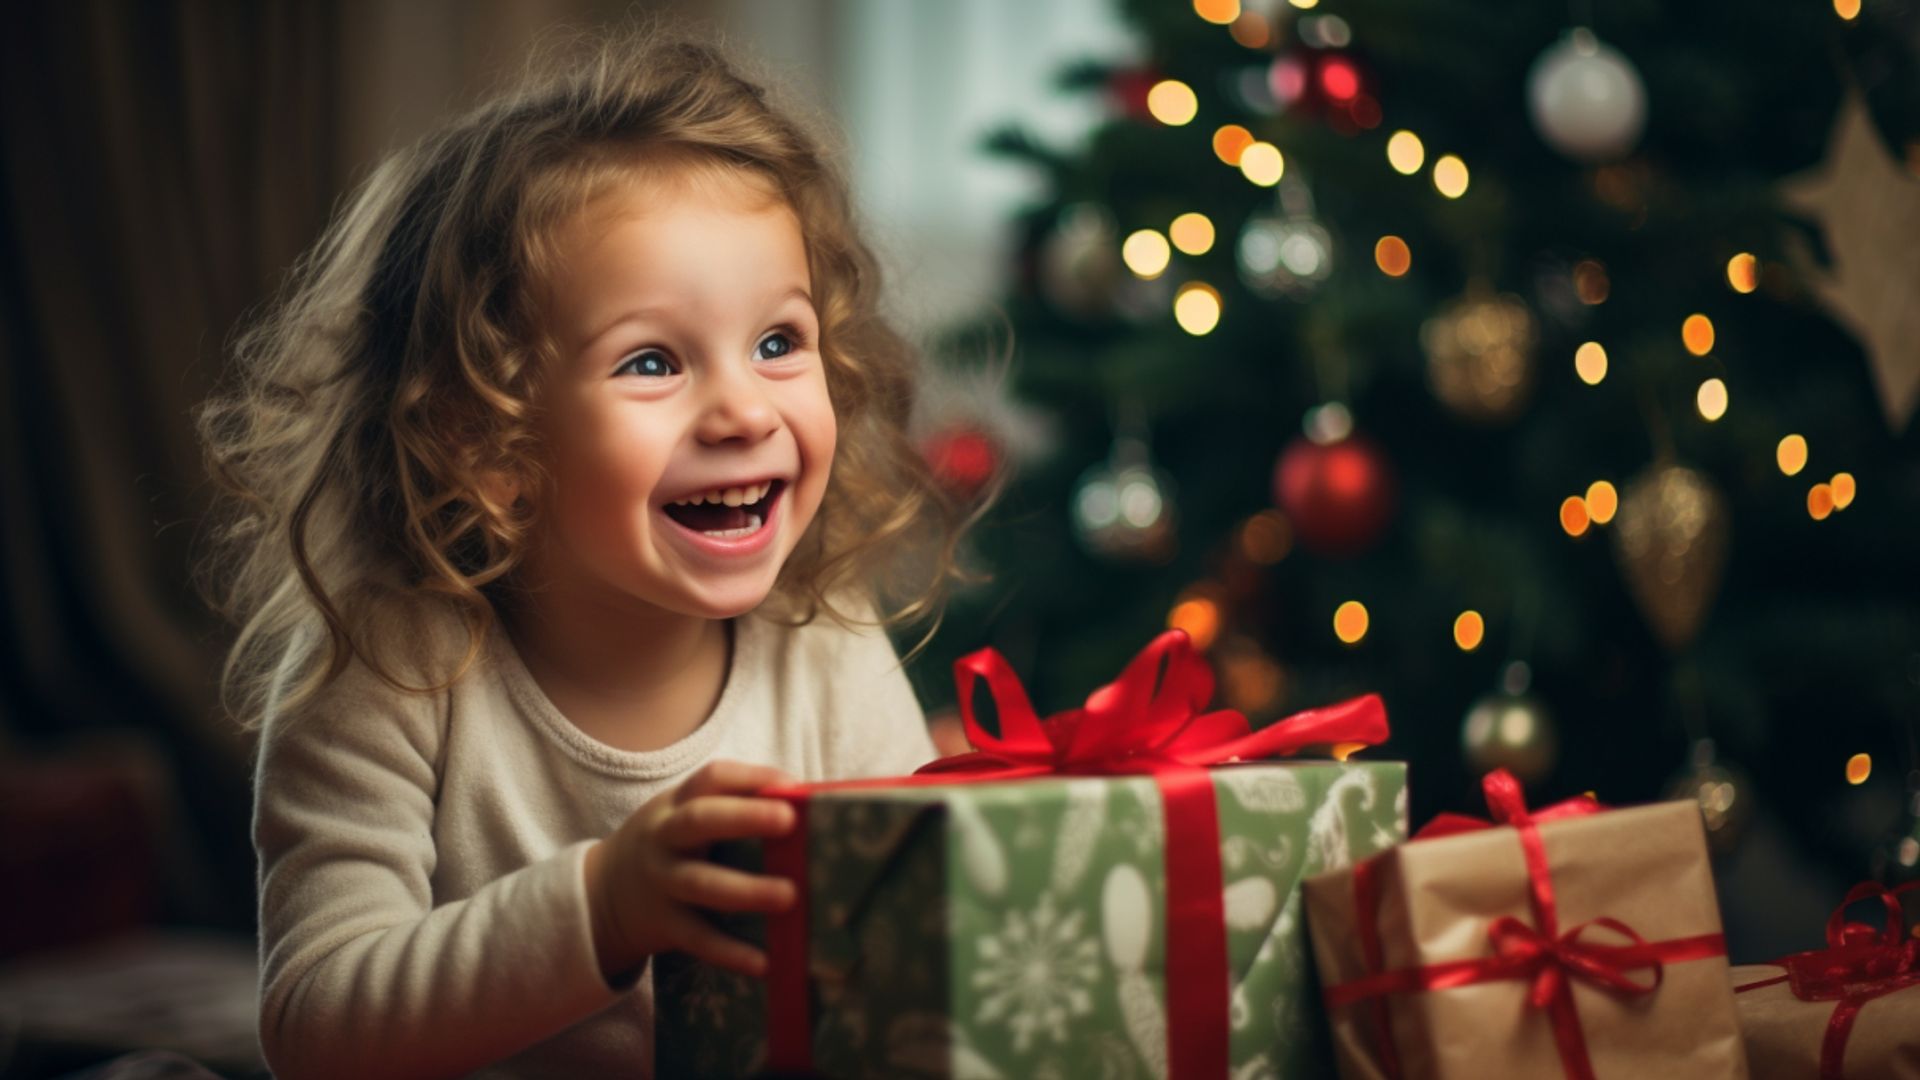 17 unique Christmas gift ideas for kids 2023: inspiration for presents